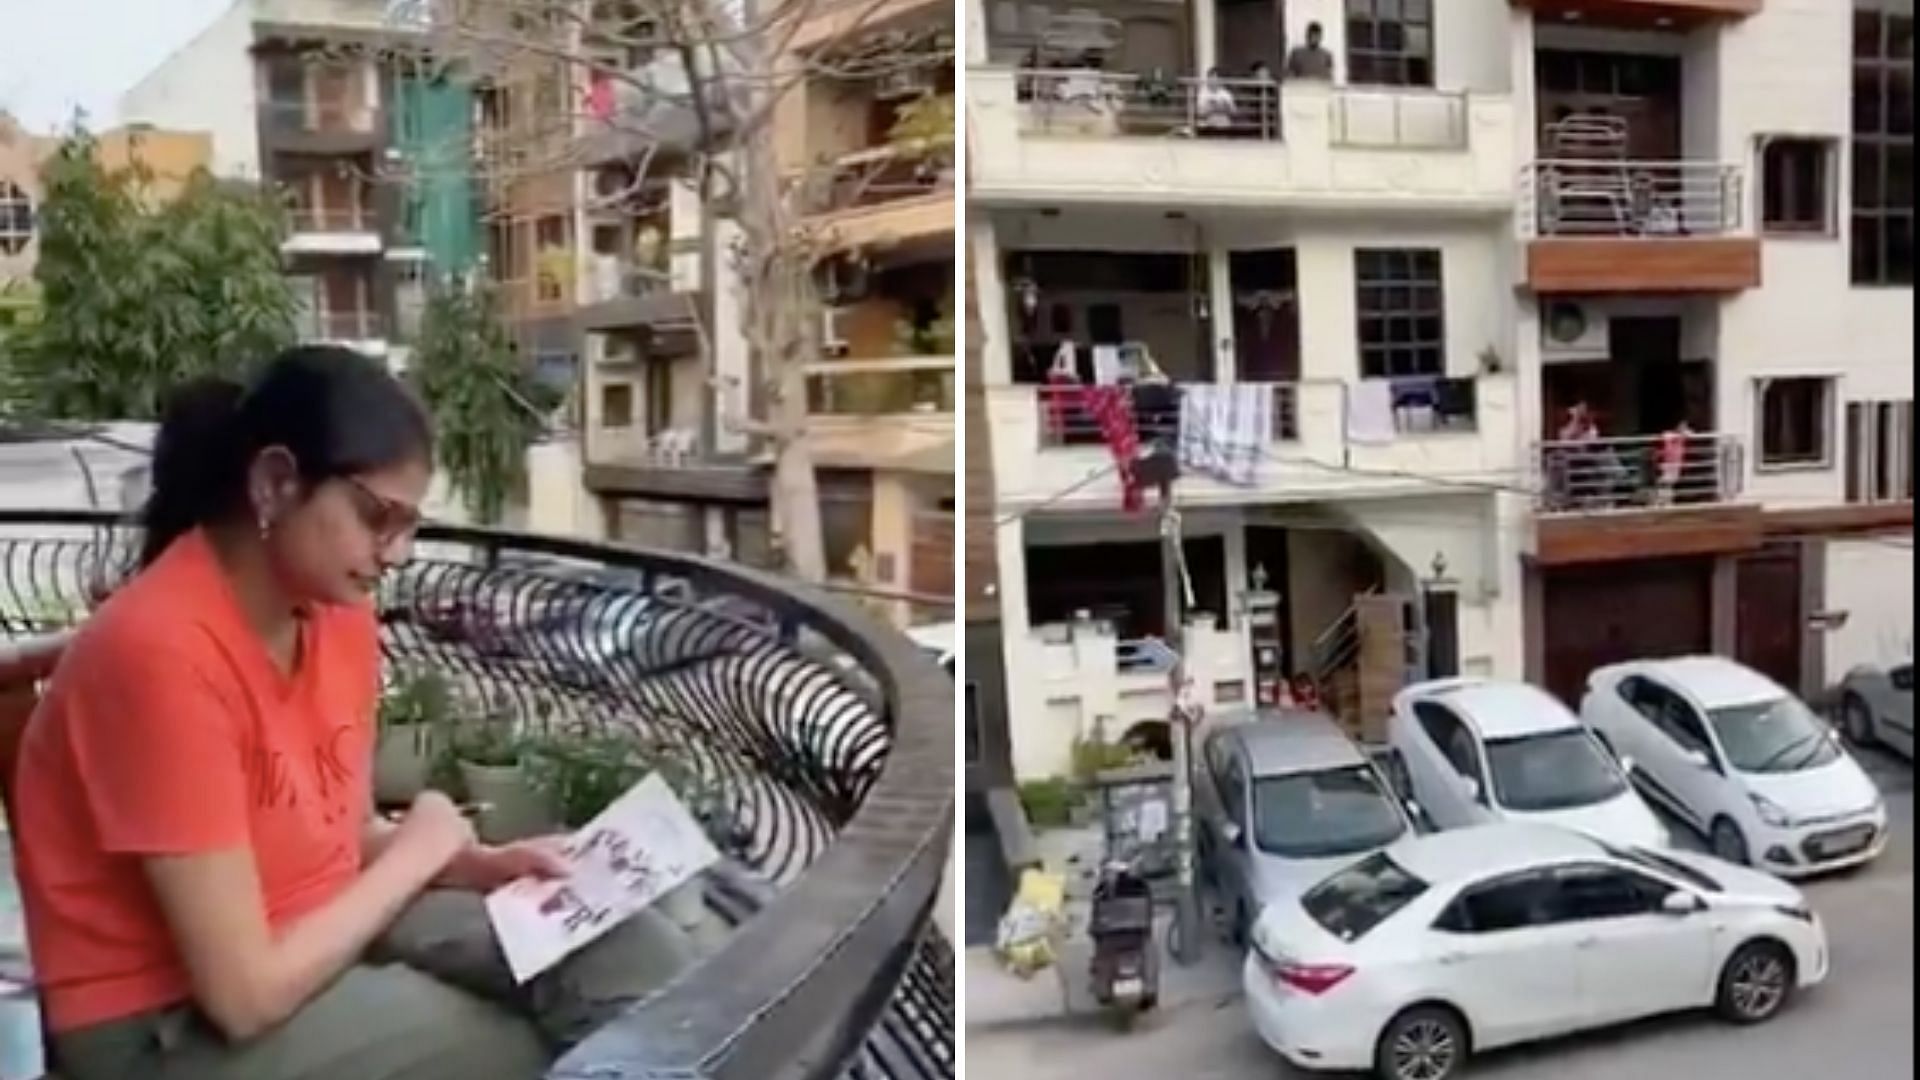 Residents get creative with a game of balcony tambola in Delhi.